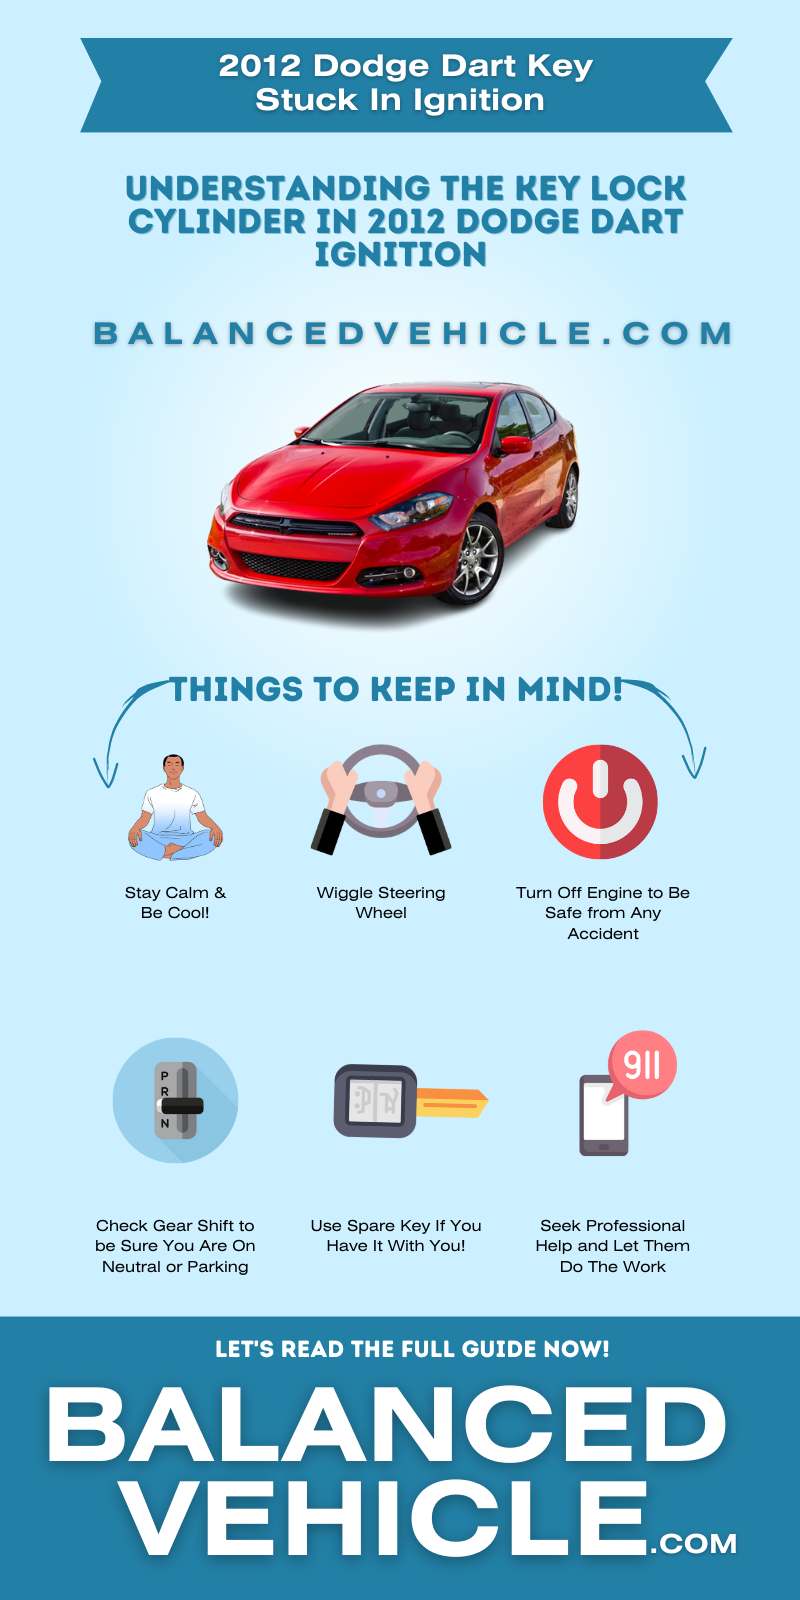 2012 Dodge Dart Key Stuck In Ignition - Infographic 